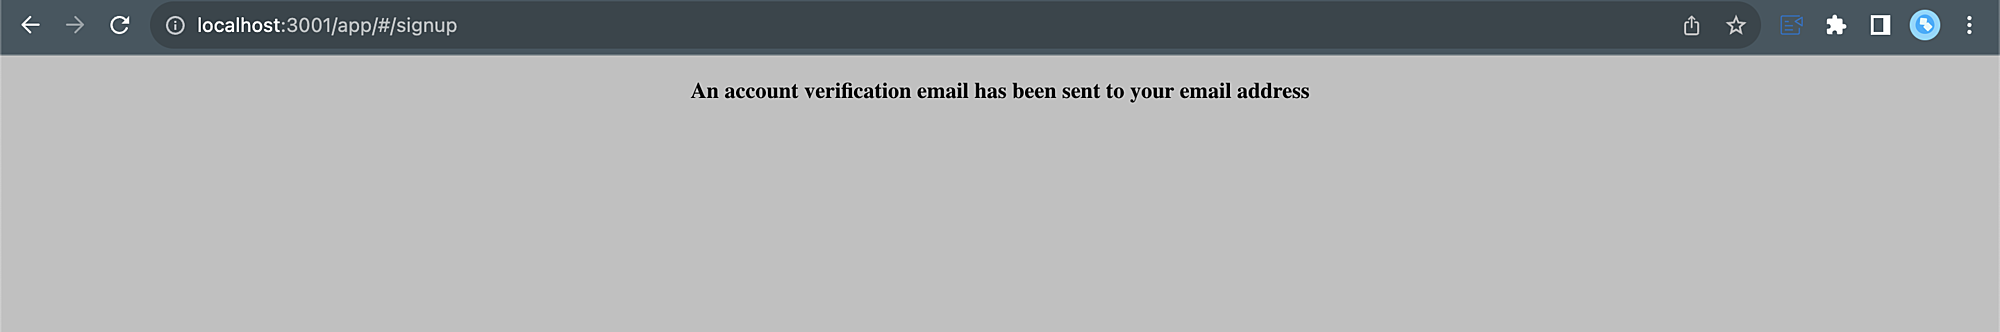 email_verification